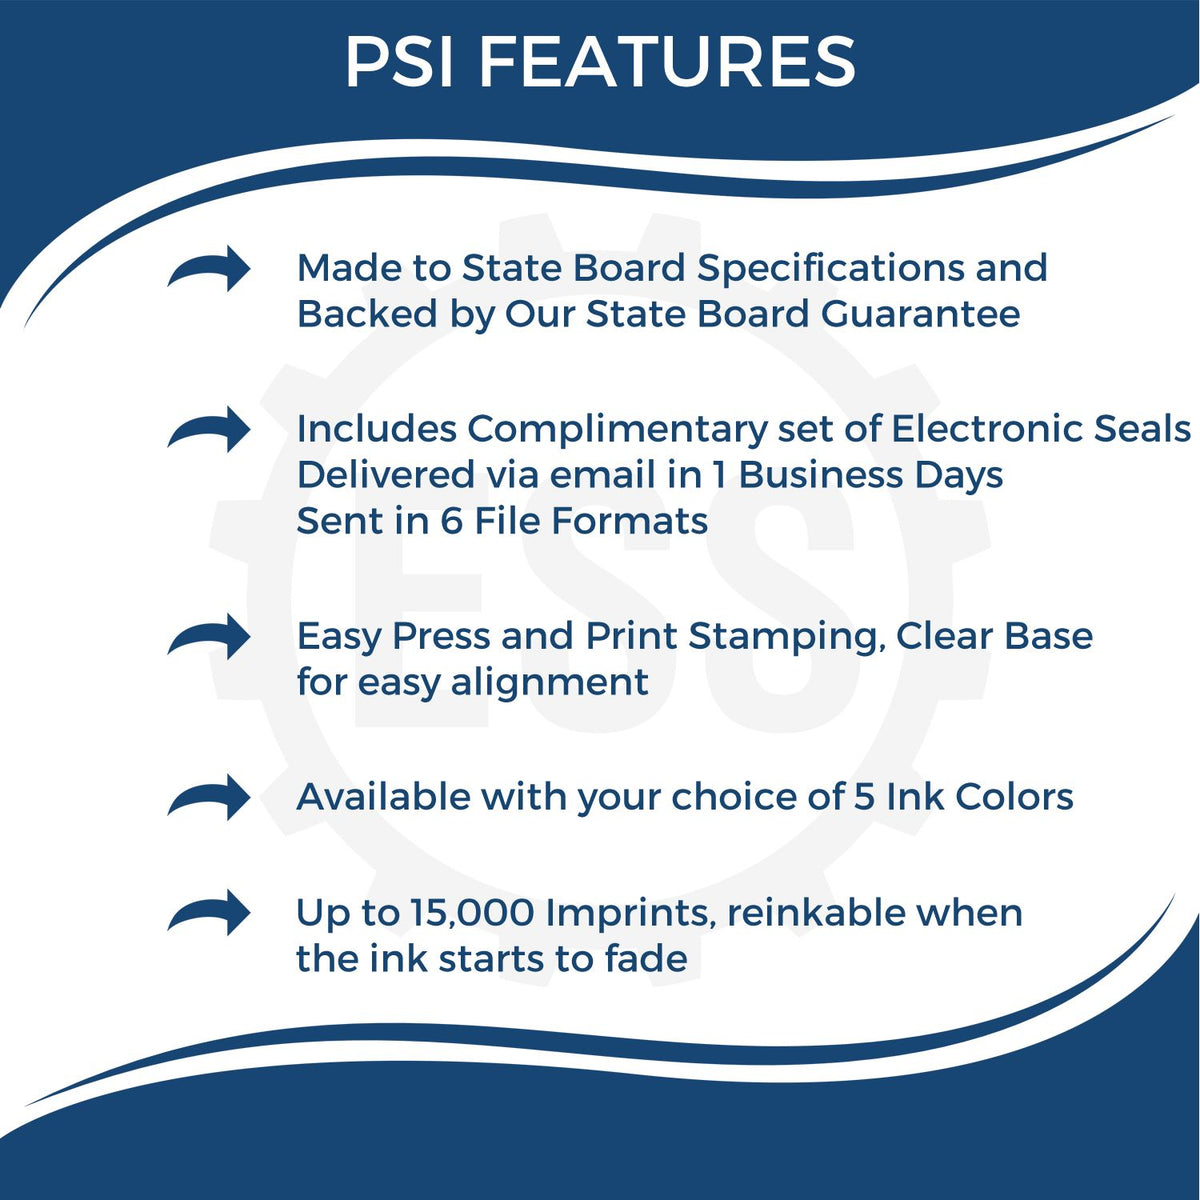 A picture of an infographic highlighting the selling points for the PSI North Carolina Notary Stamp